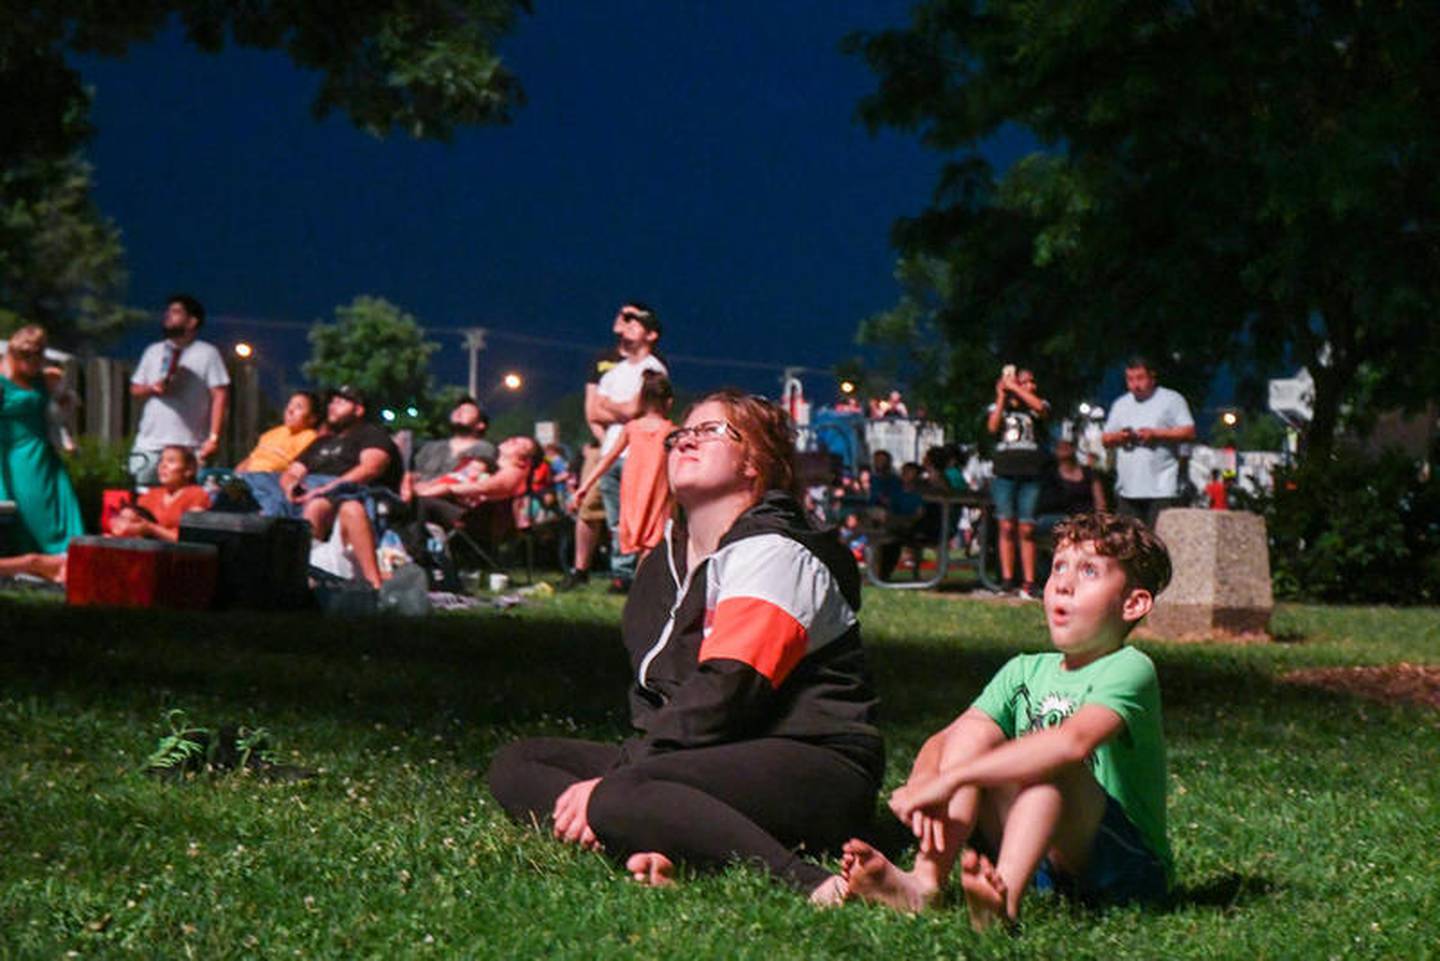 Vincent and his mom Kelly Tan of DeKalb watch the fireworks at Hopkins Park during the July Fourth festivities and fireworks.